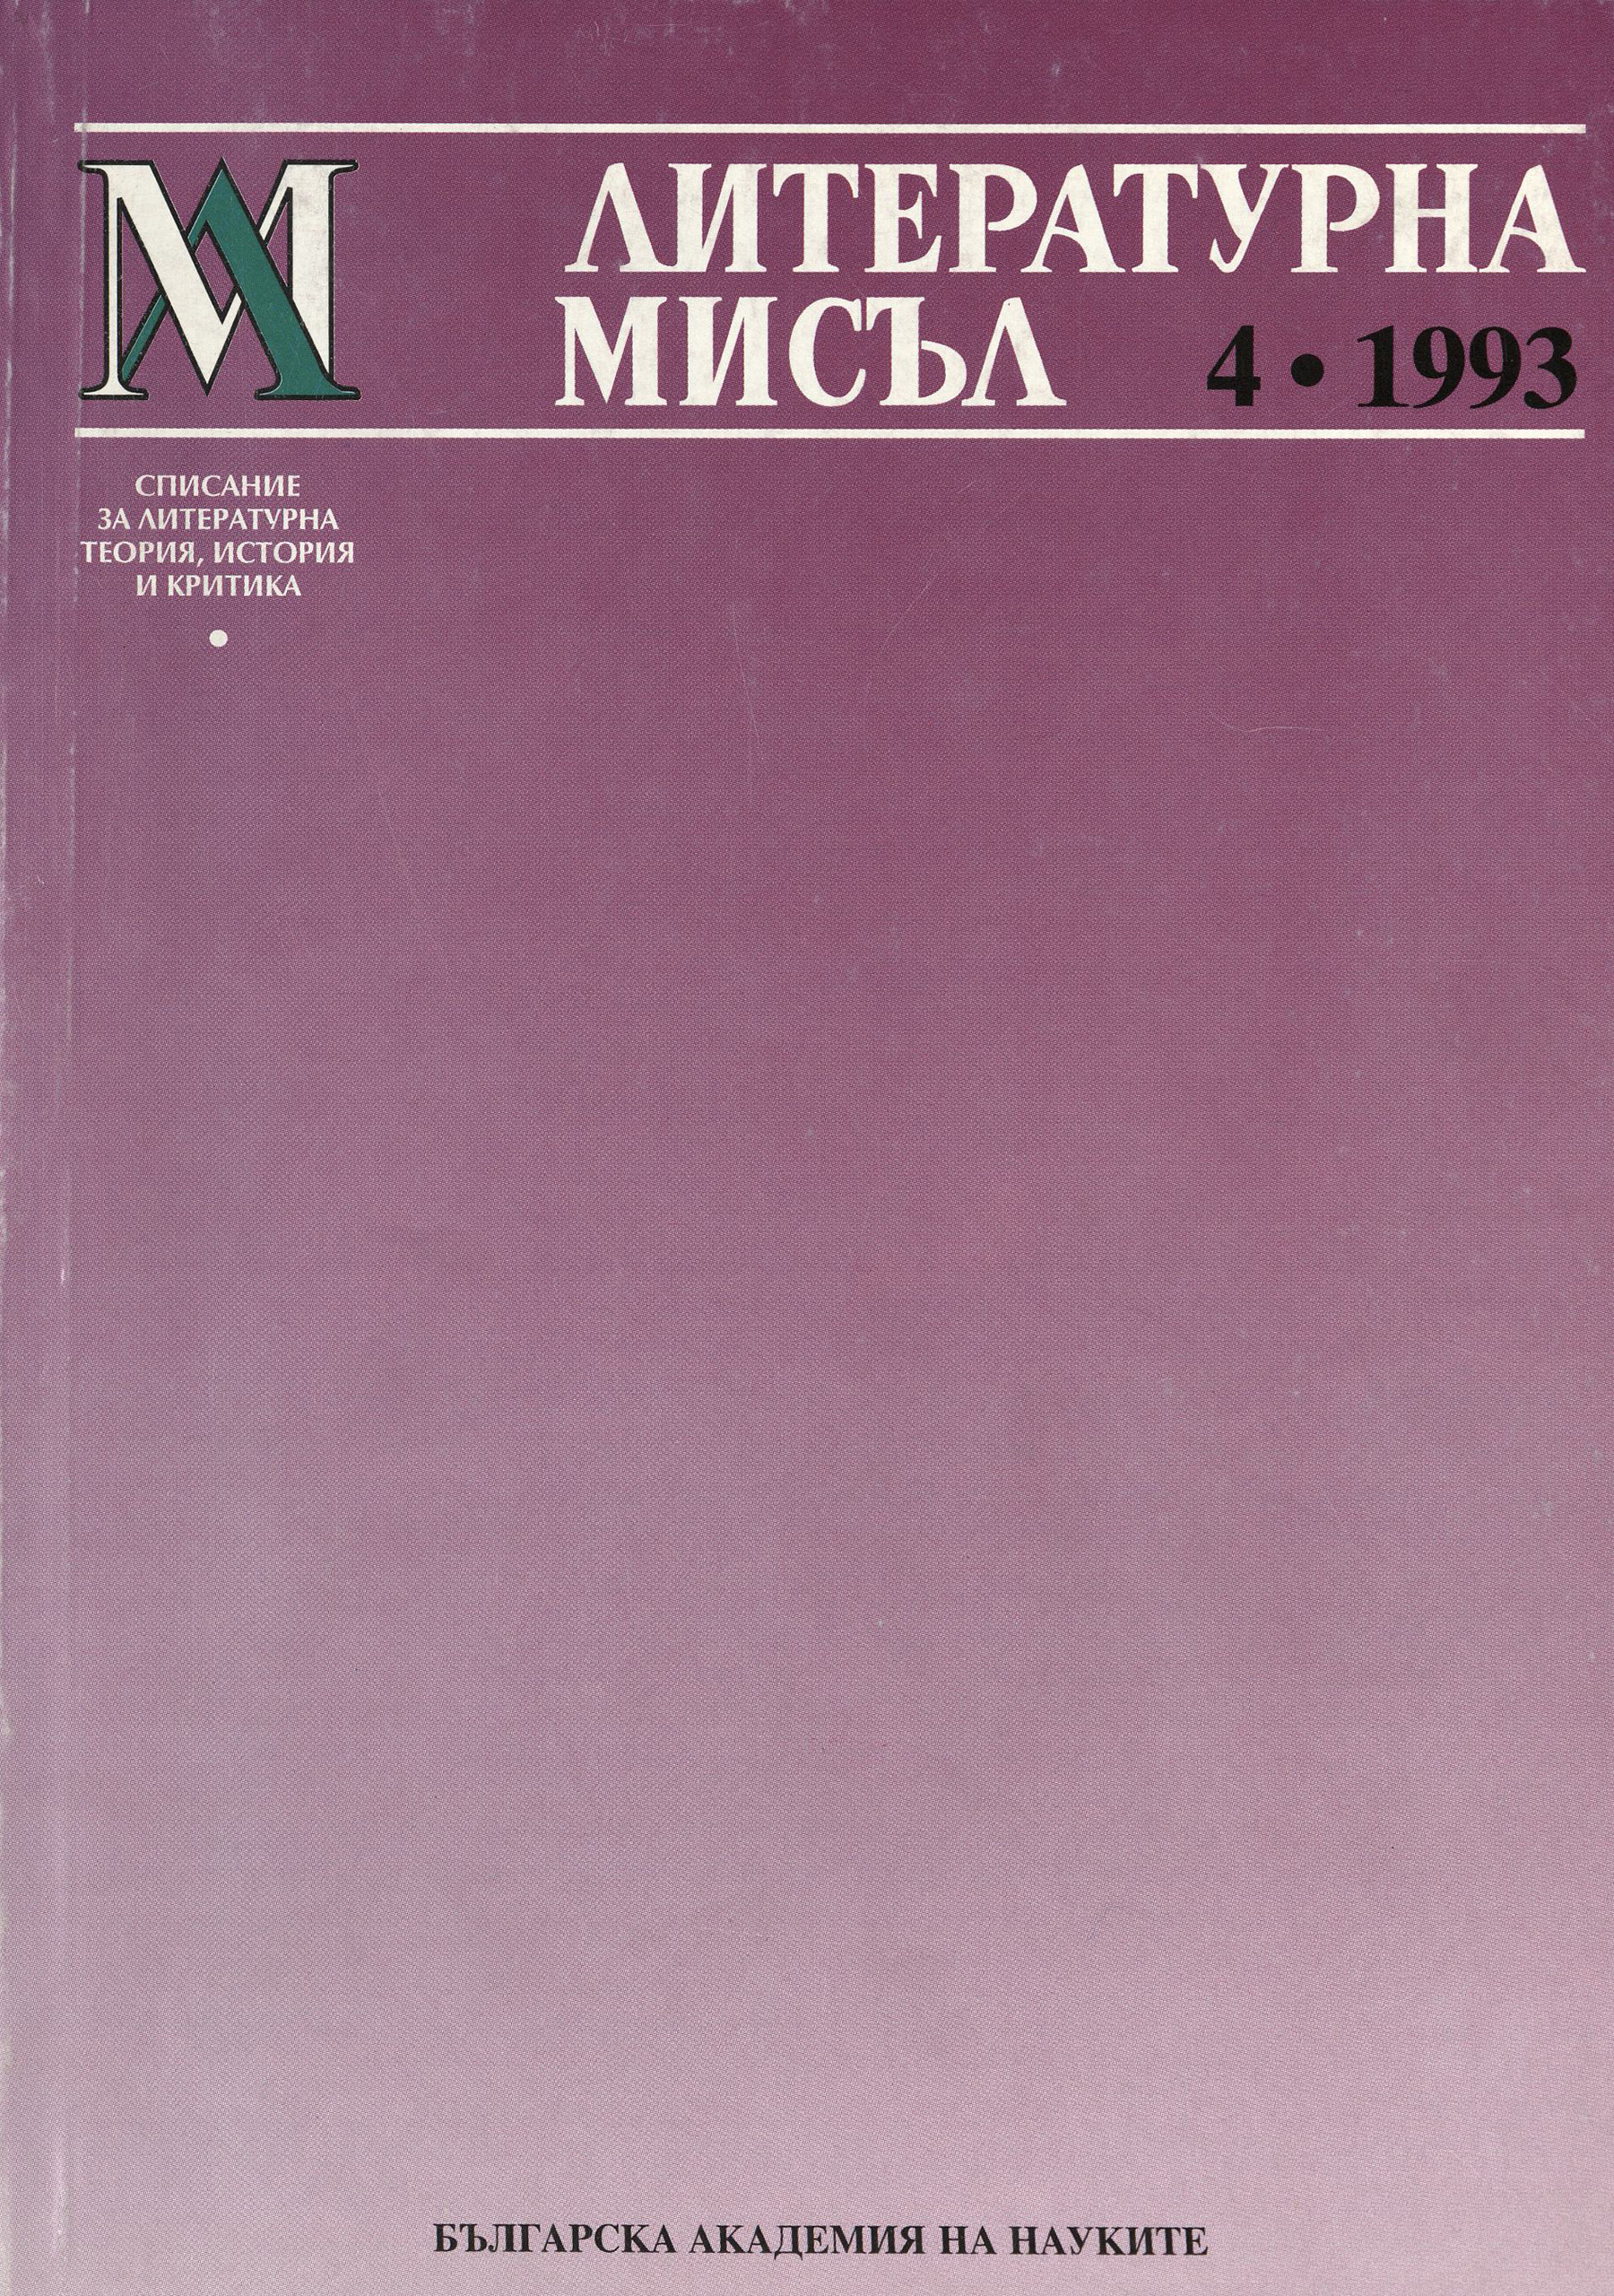 Issue 4, 1993